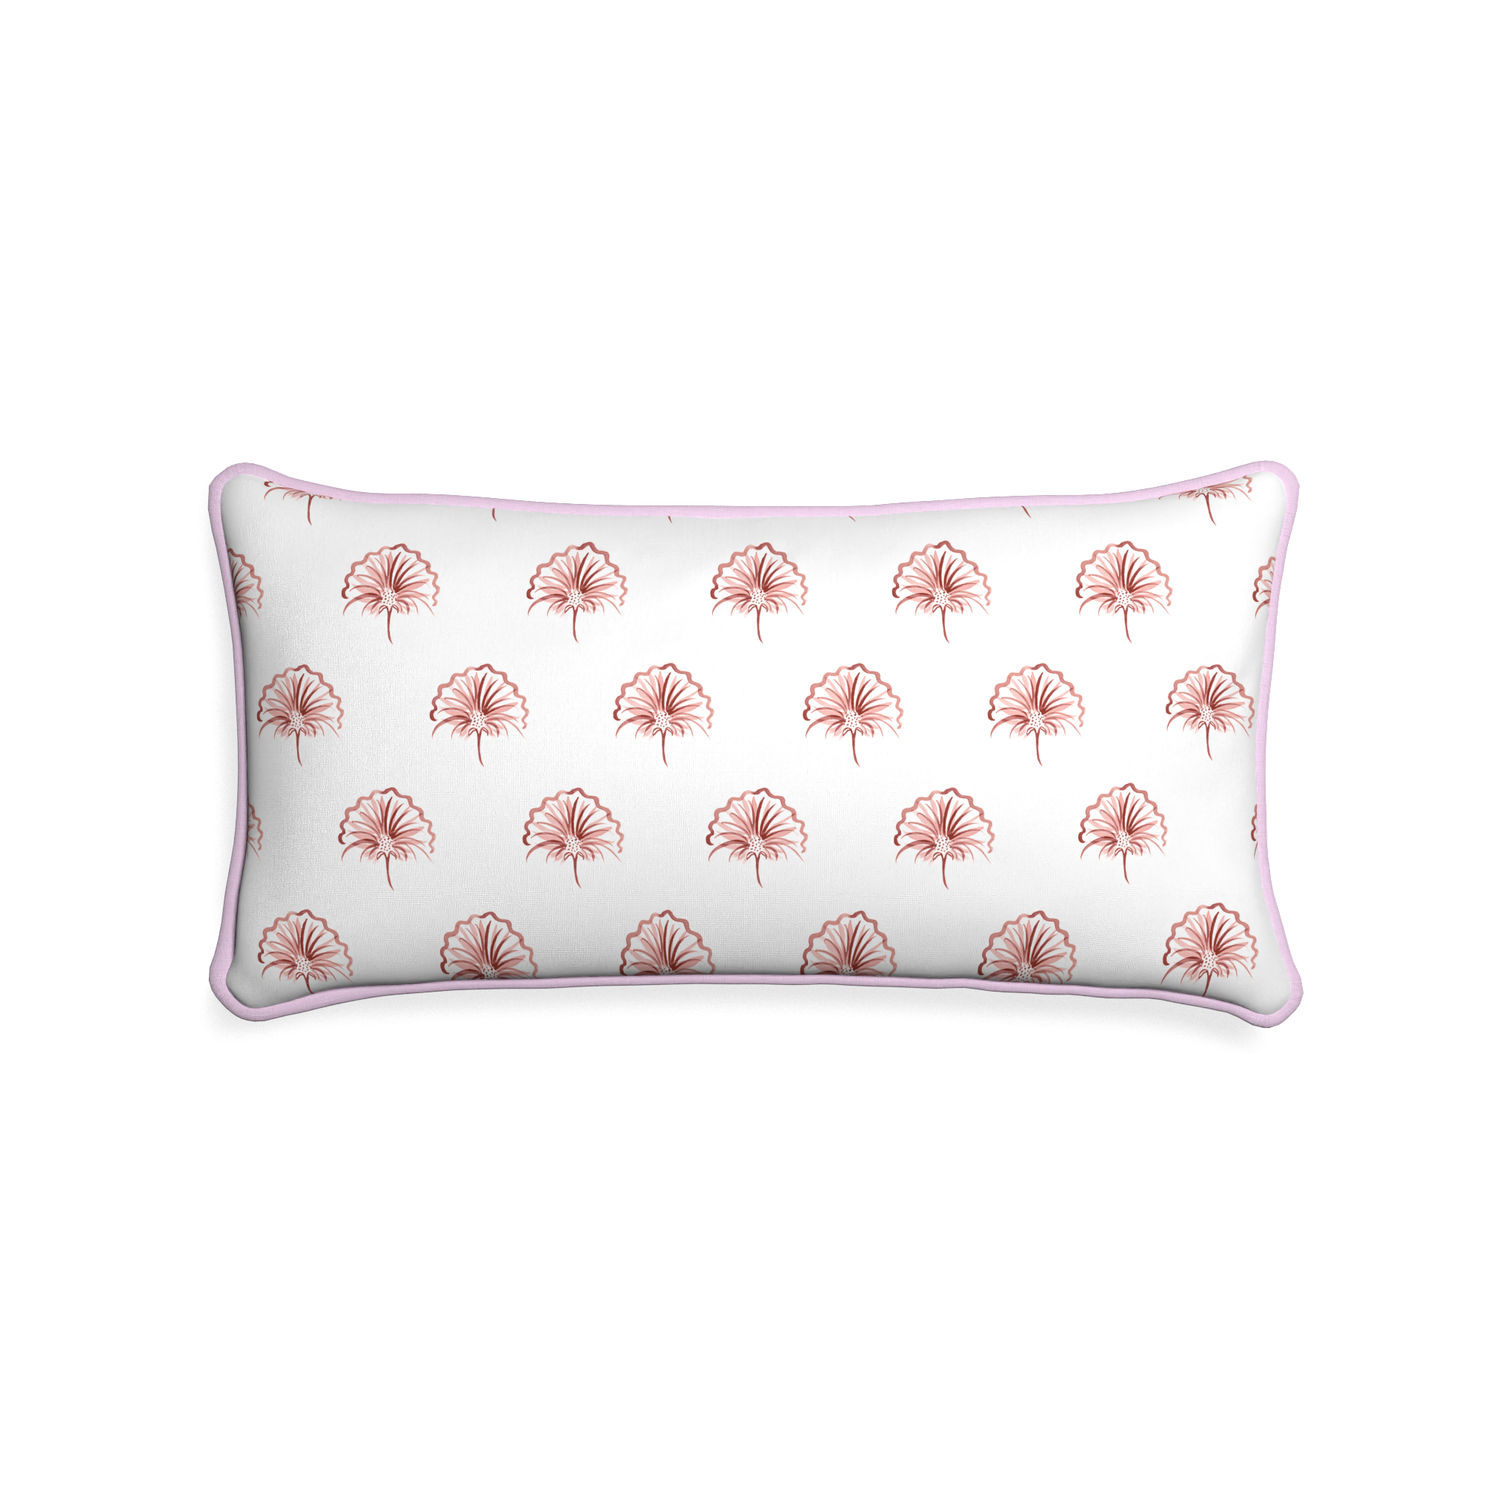 Midi-lumbar penelope rose custom floral pinkpillow with l piping on white background